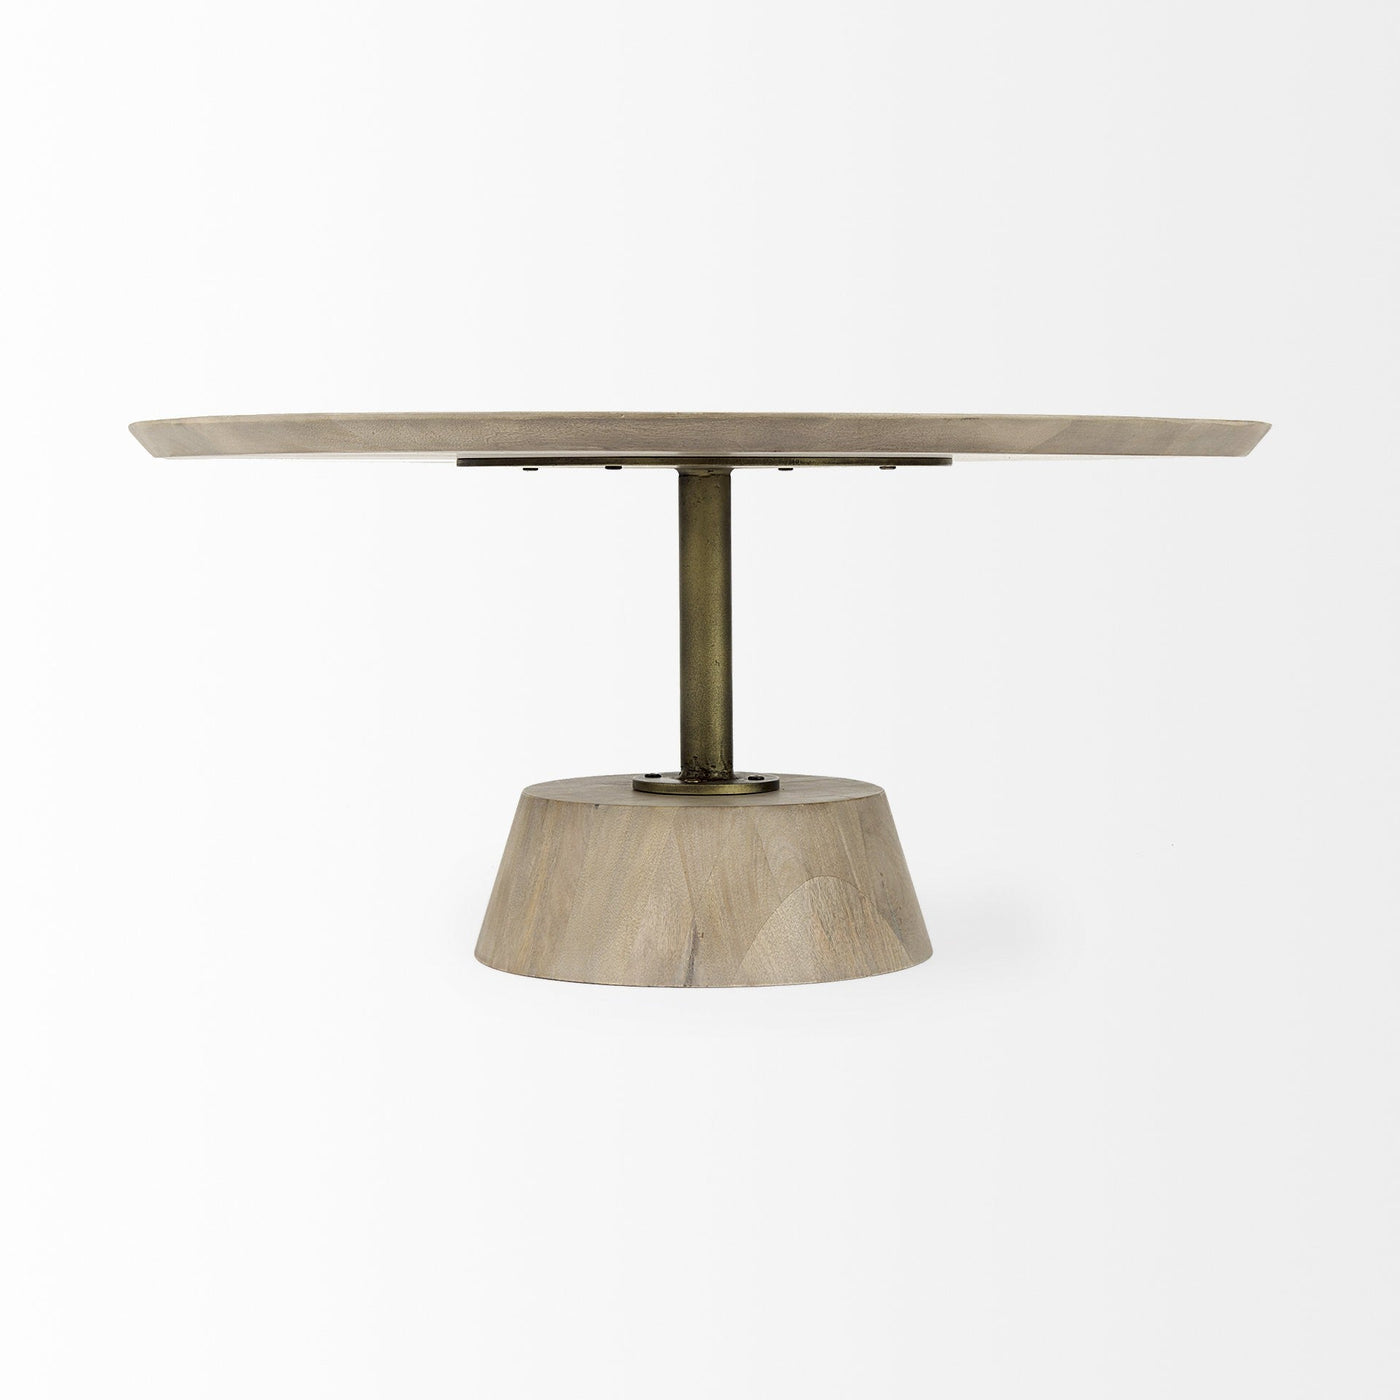 Light Brown Wooden Pedestal Coffee Table - Coffee Tables